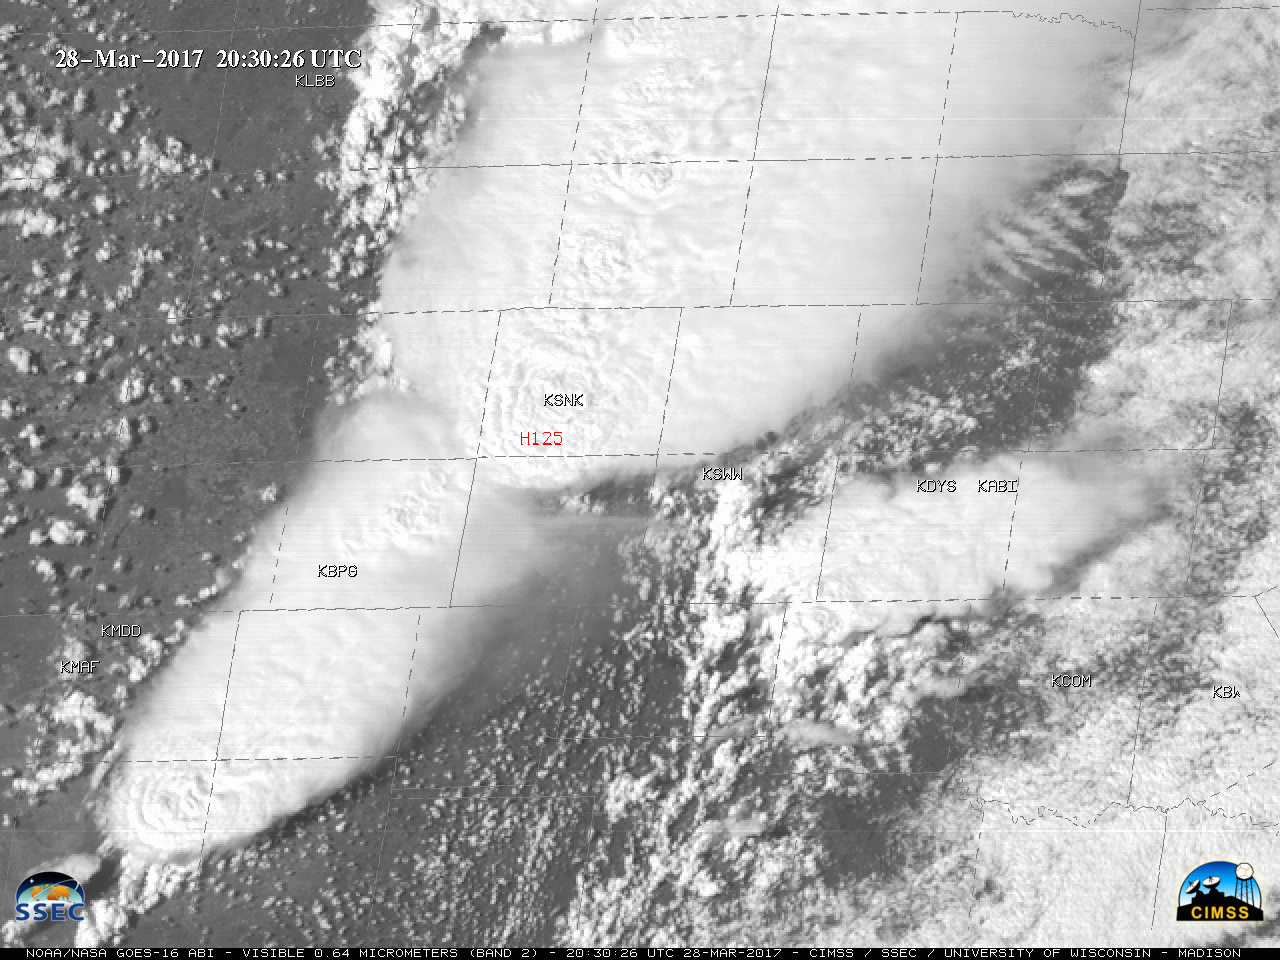 GOES-16 Visible (0.64 µm) images, with SPC storm reports of hail and tornadoes [click to play MP4 animation]